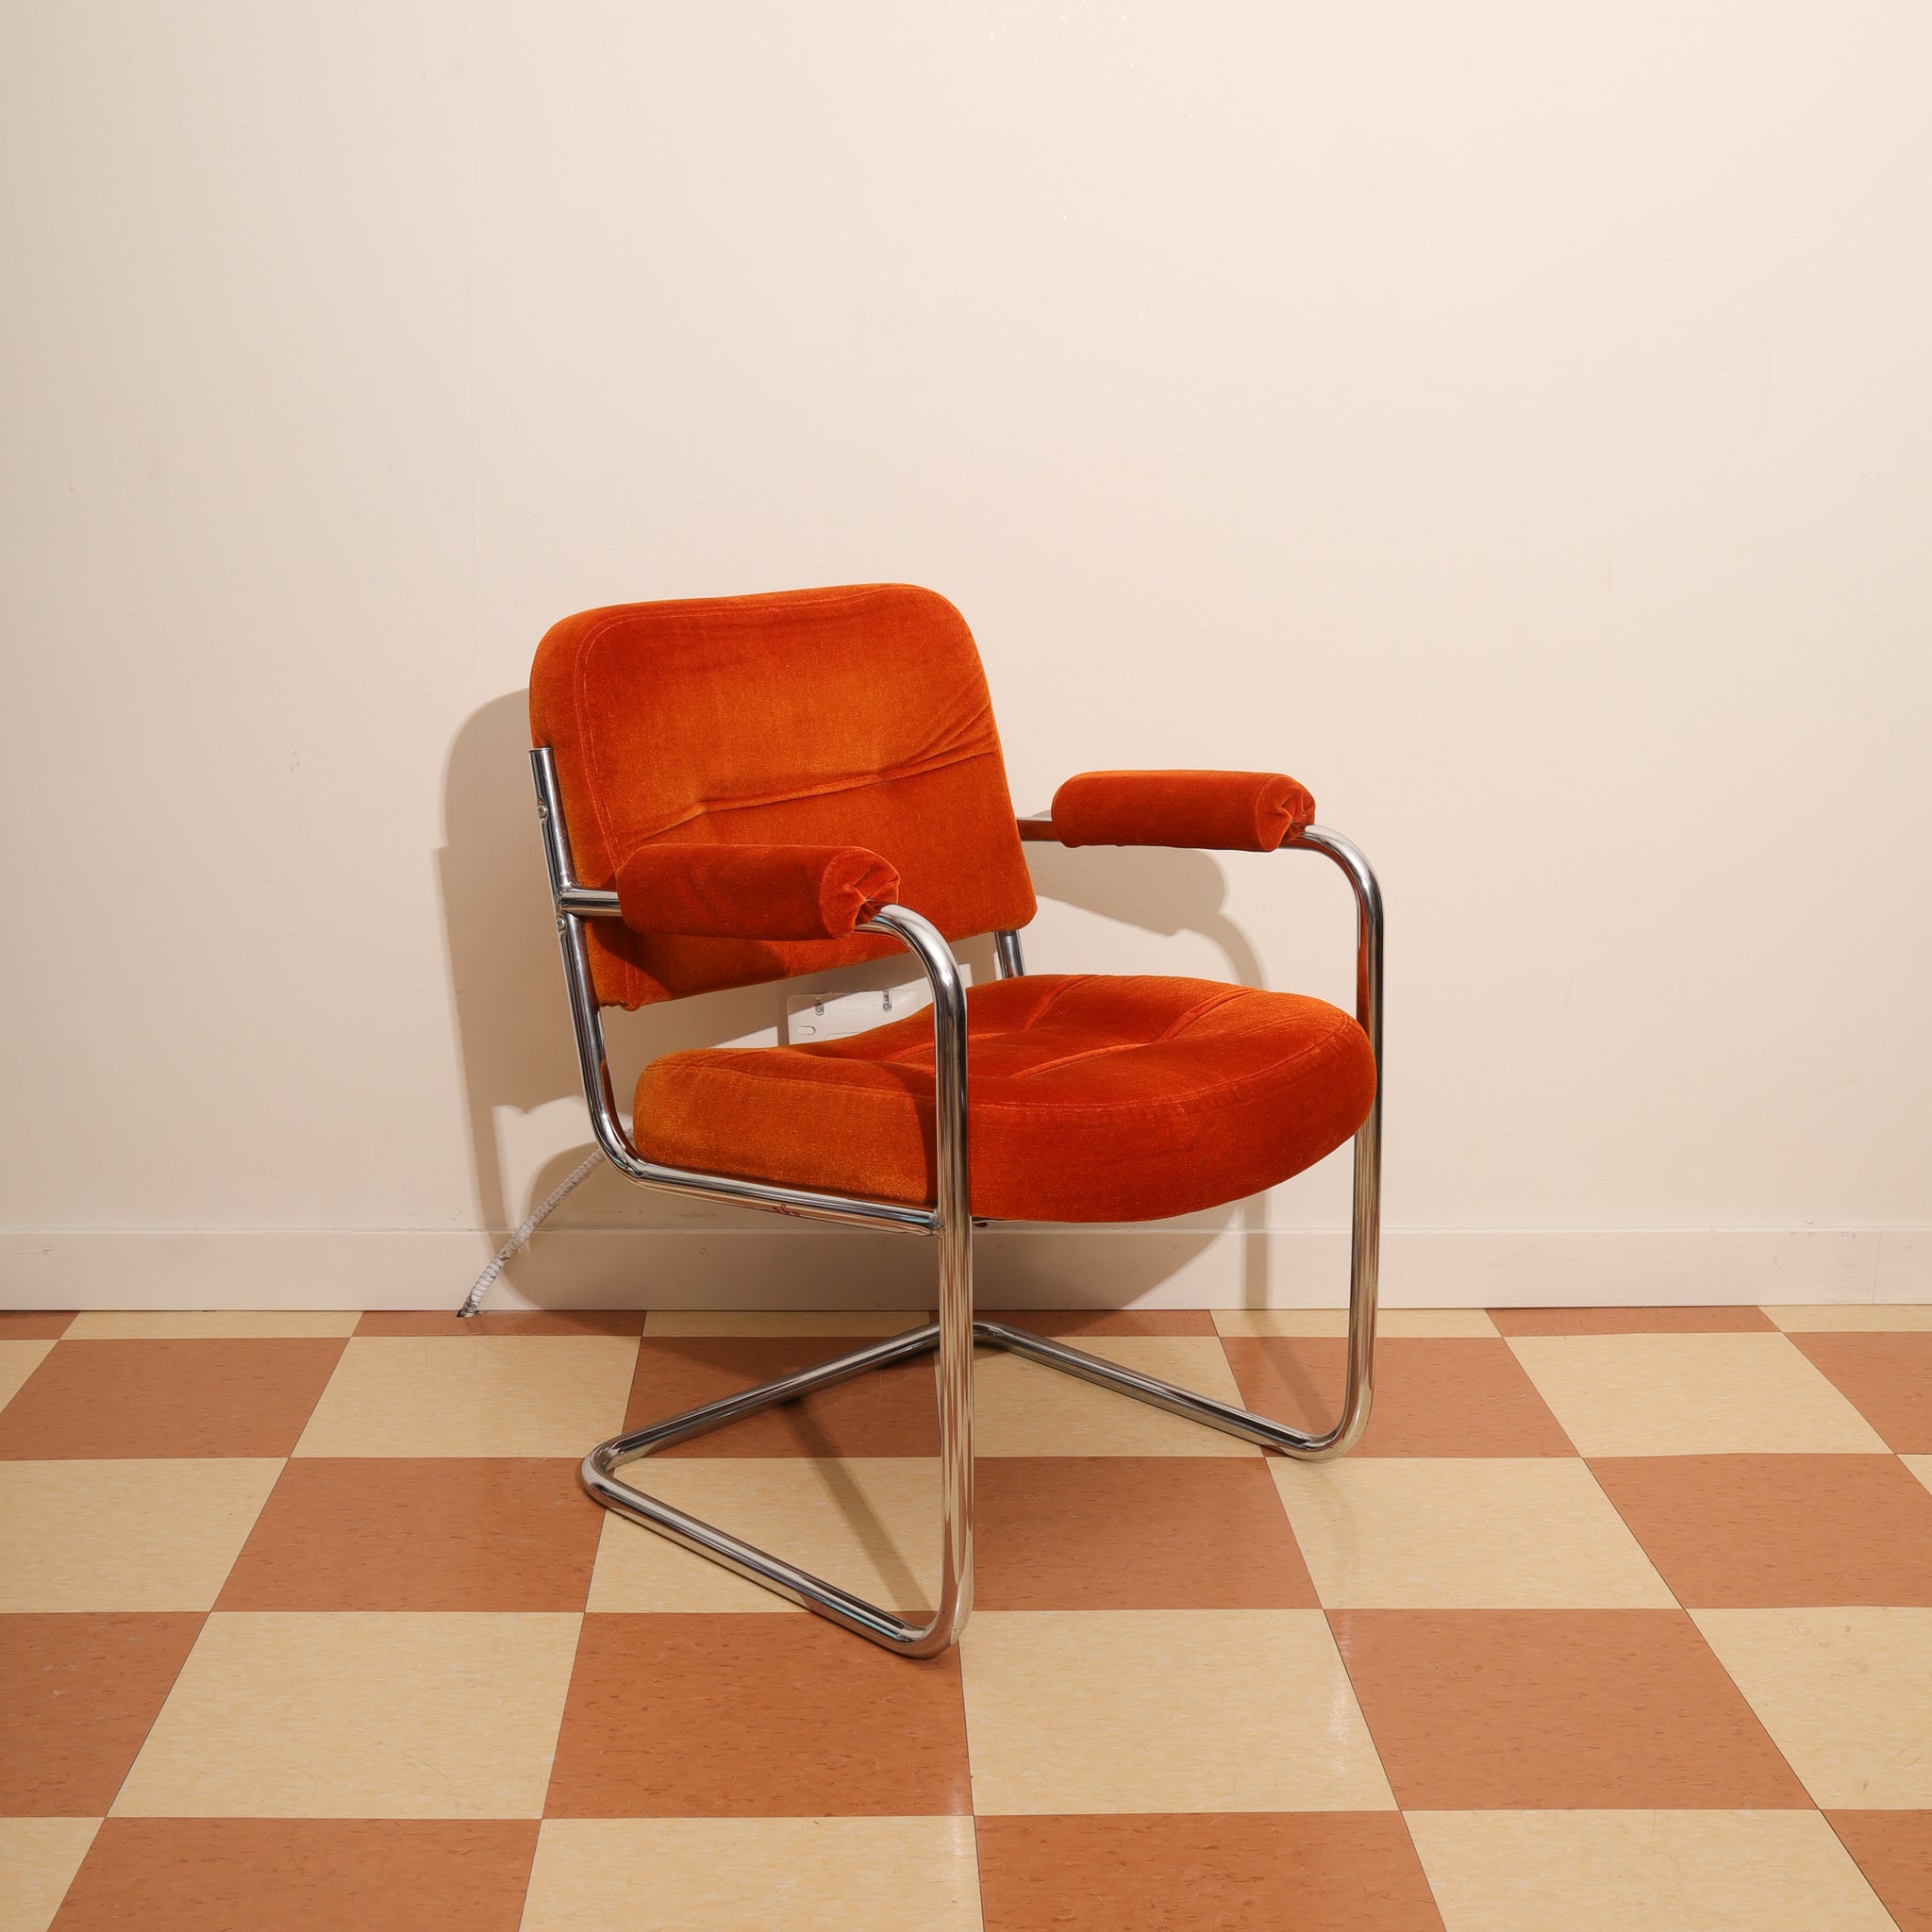 Plush Orange Cantilever Chairs - 1970s - Sold Separately